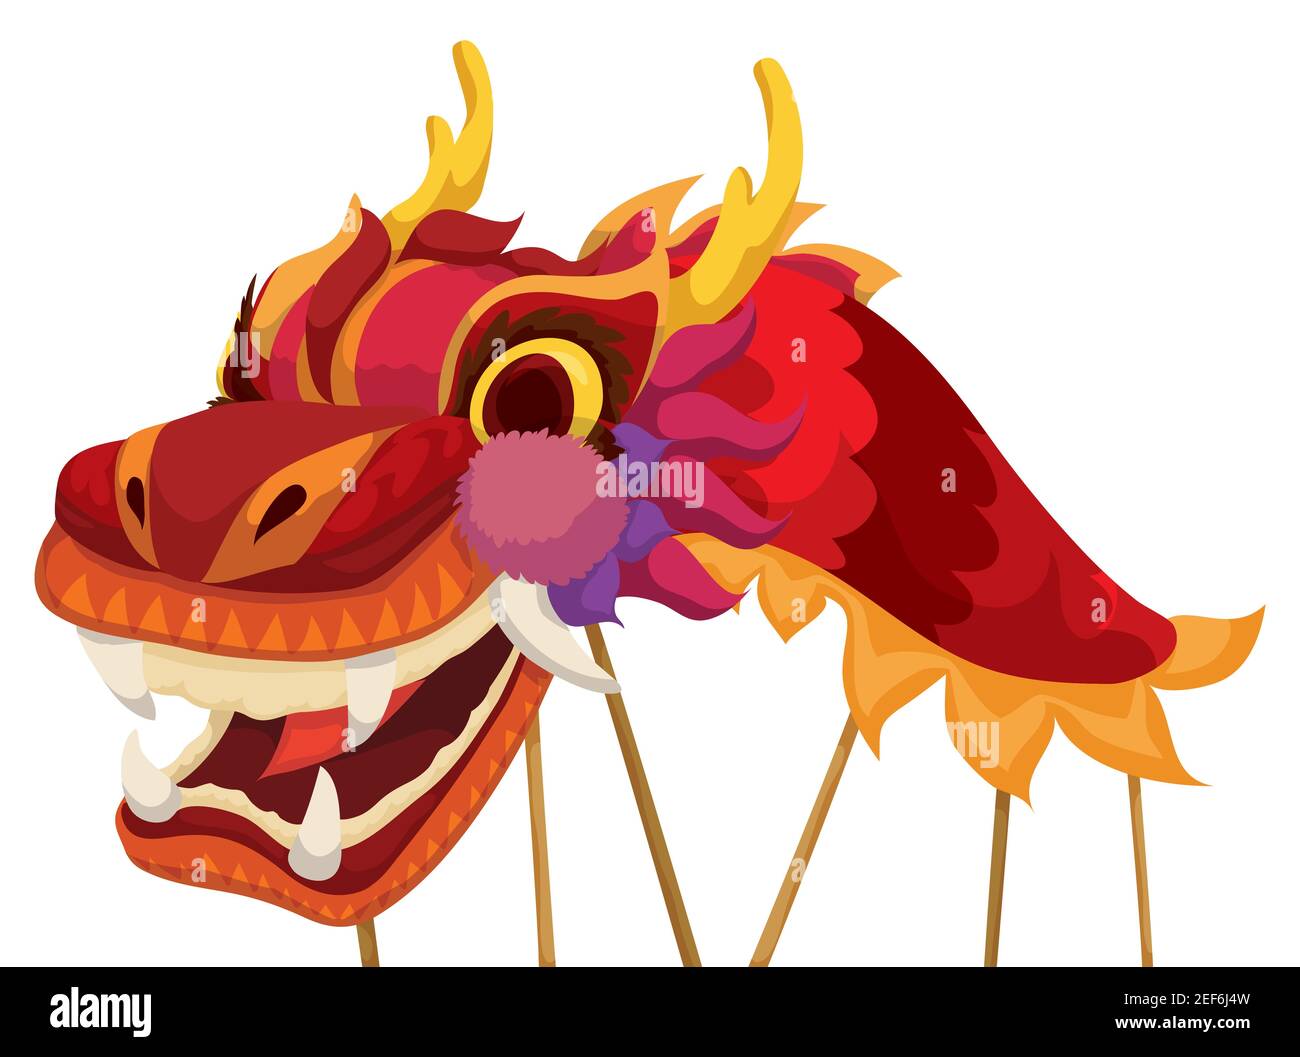 Red dragon costume ready to perform its traditional dance during Chinese holidays, isolated over white background. Stock Vector